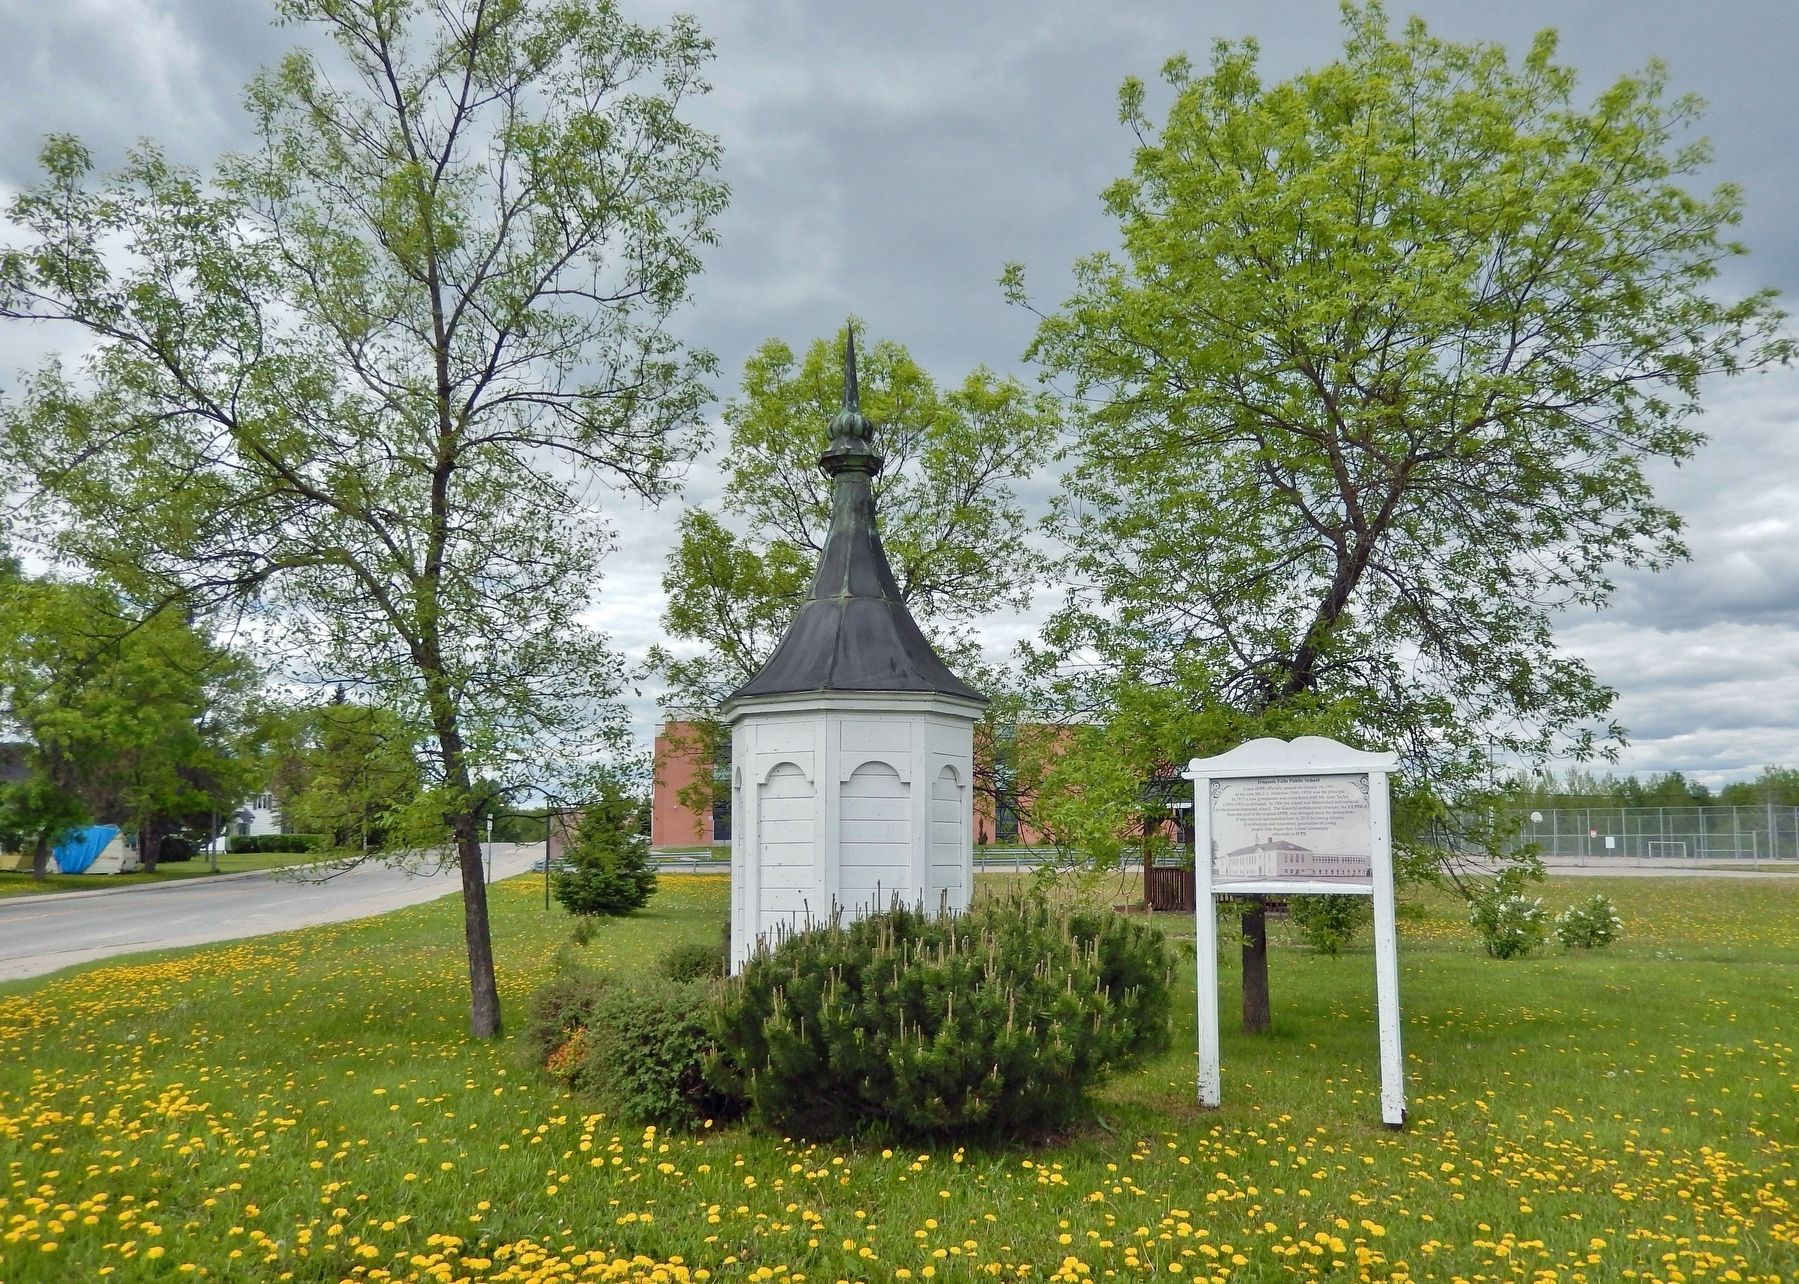 Iroquois Falls Public School Marker & Cupola image. Click for full size.